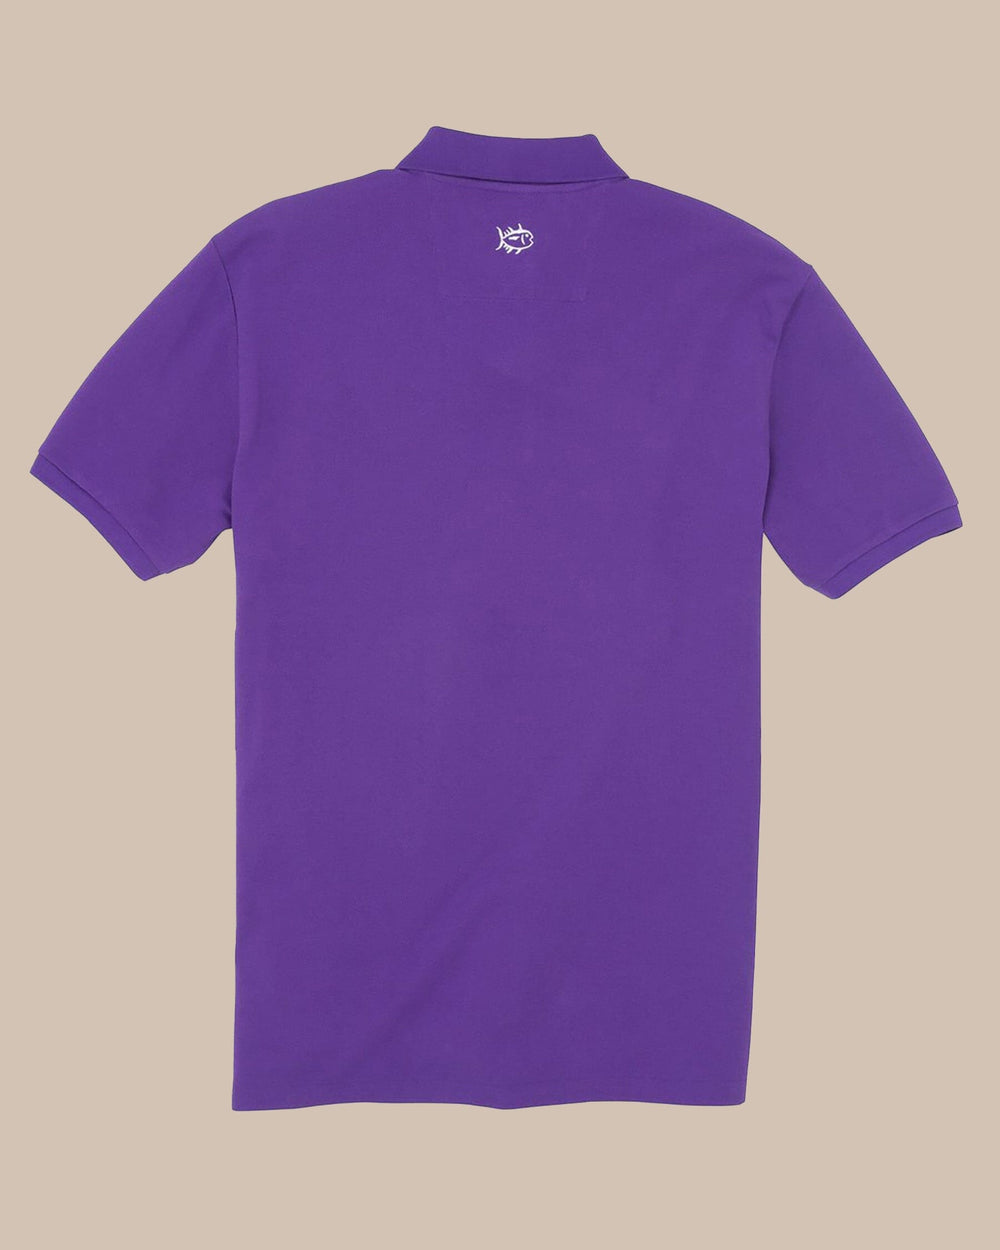 The back view of the Men's Purple Skipjack Gameday Colors Polo Shirt by Southern Tide - Regal Purple